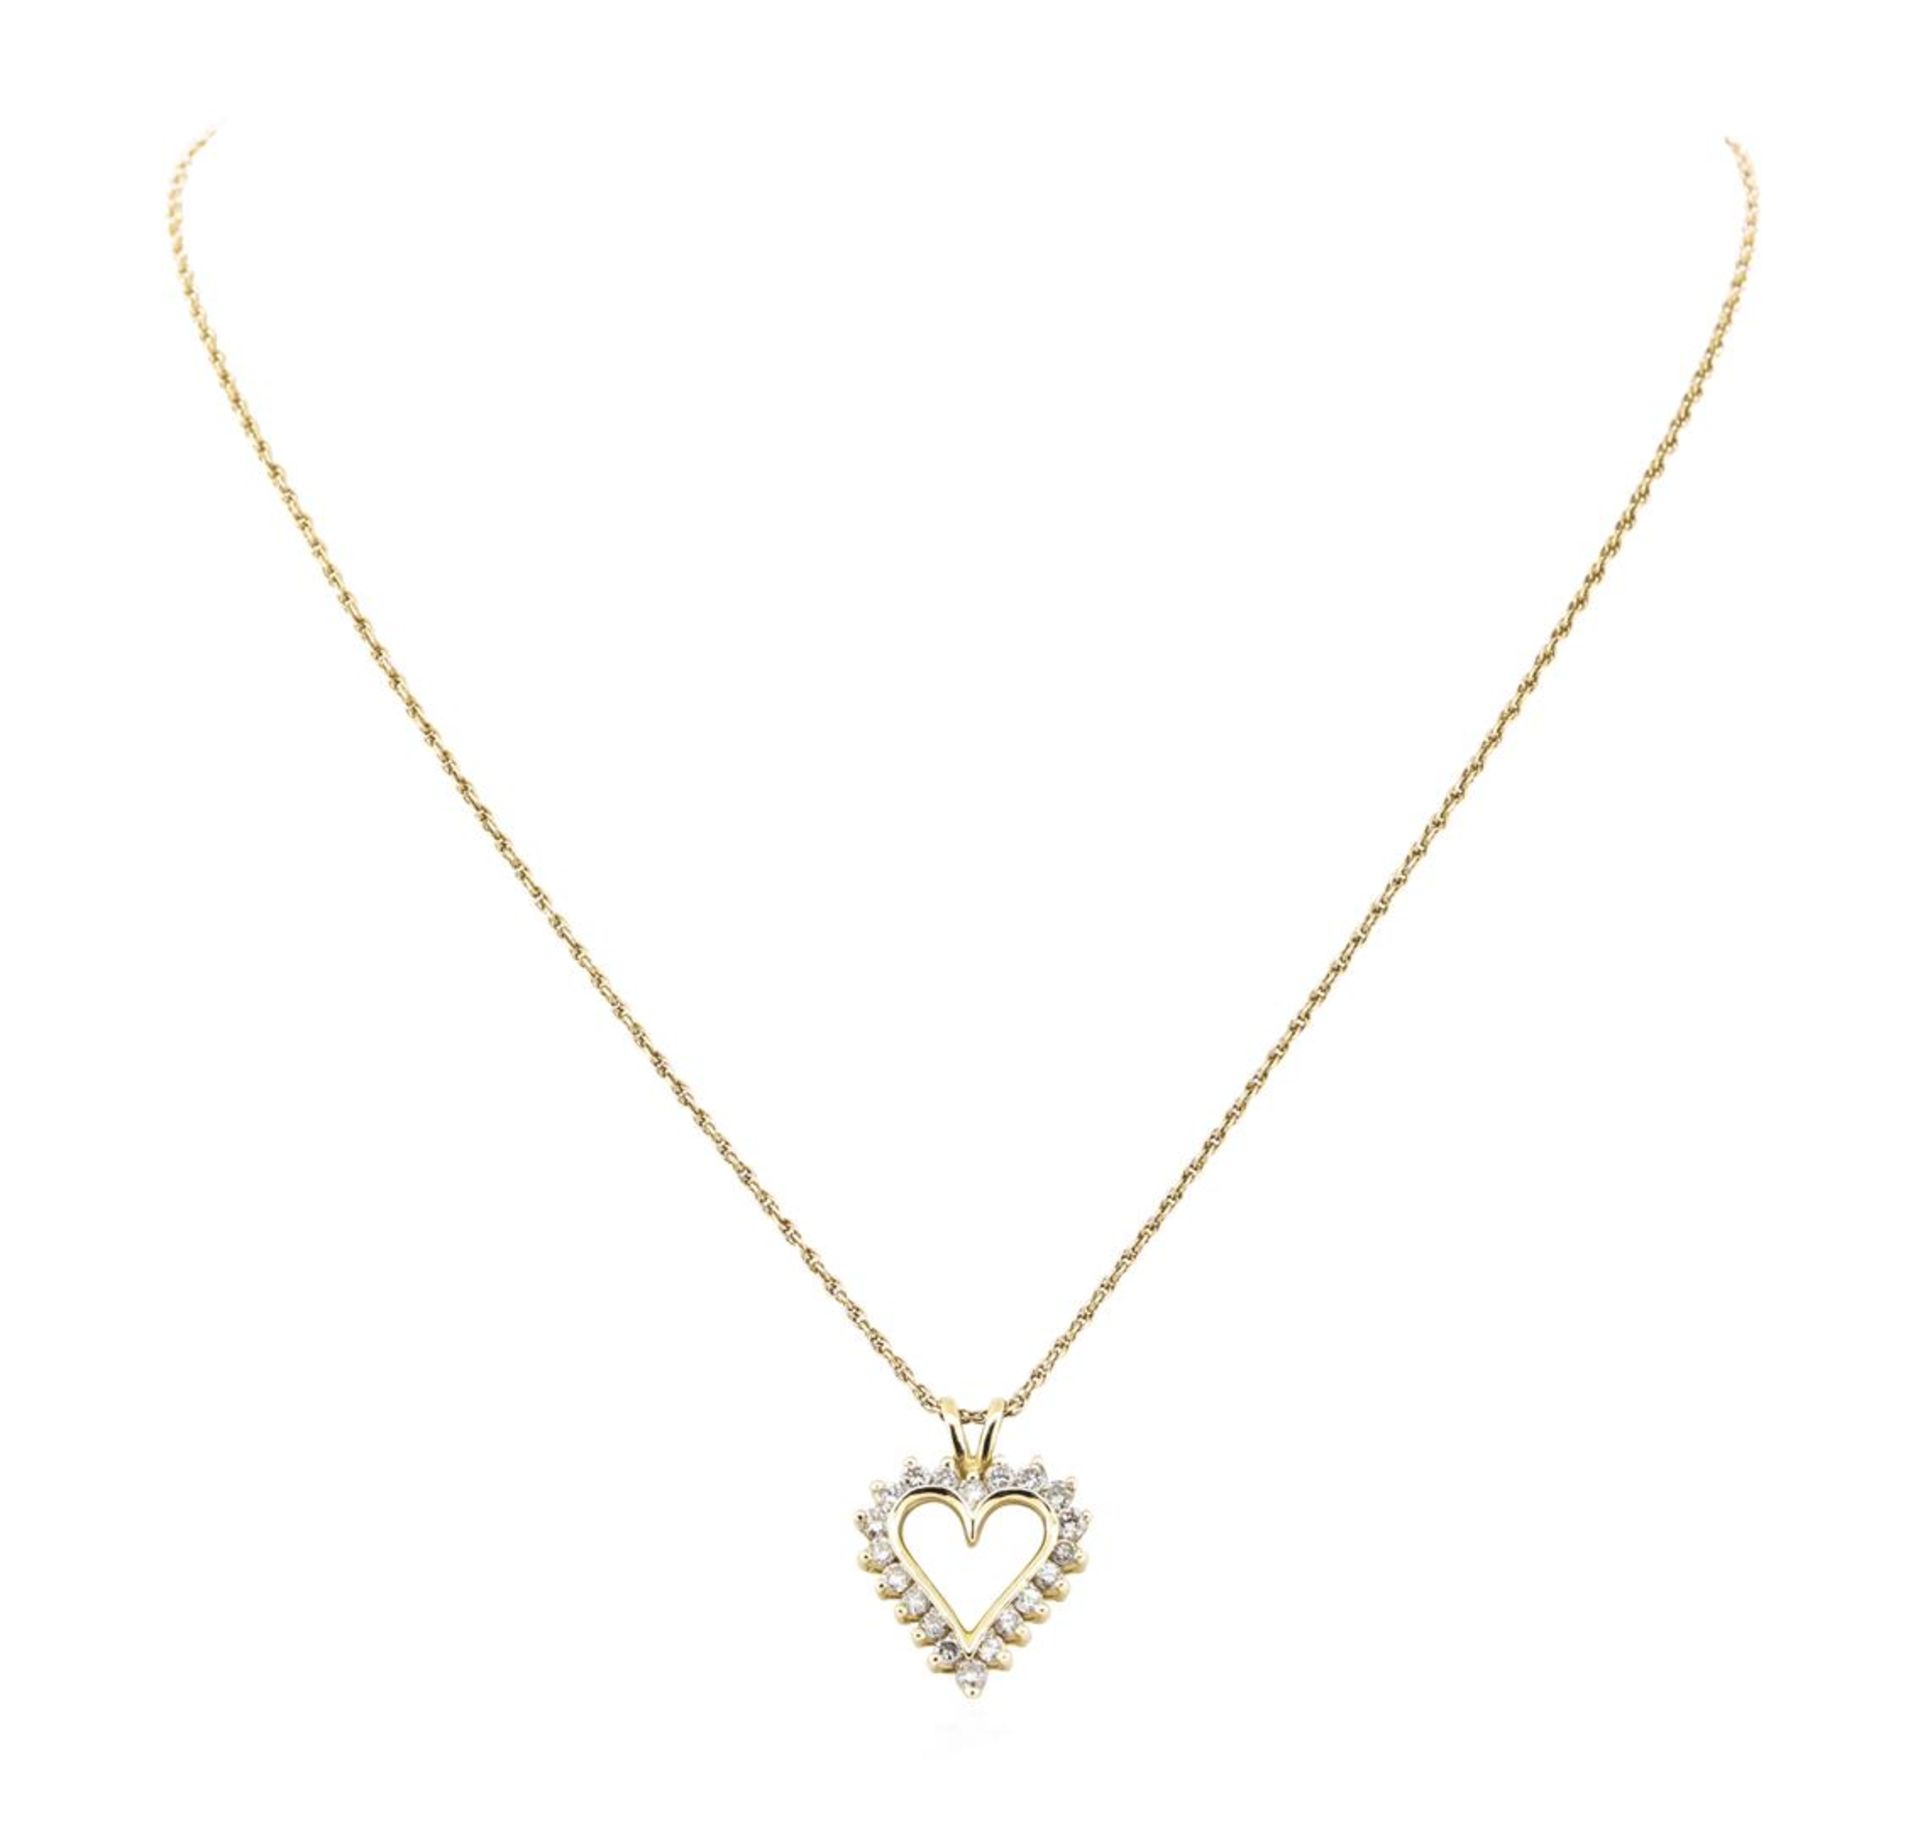 1.00 ctw Diamond Heart Shaped Pendant with Chain - 14KT Yellow Gold - Image 2 of 2